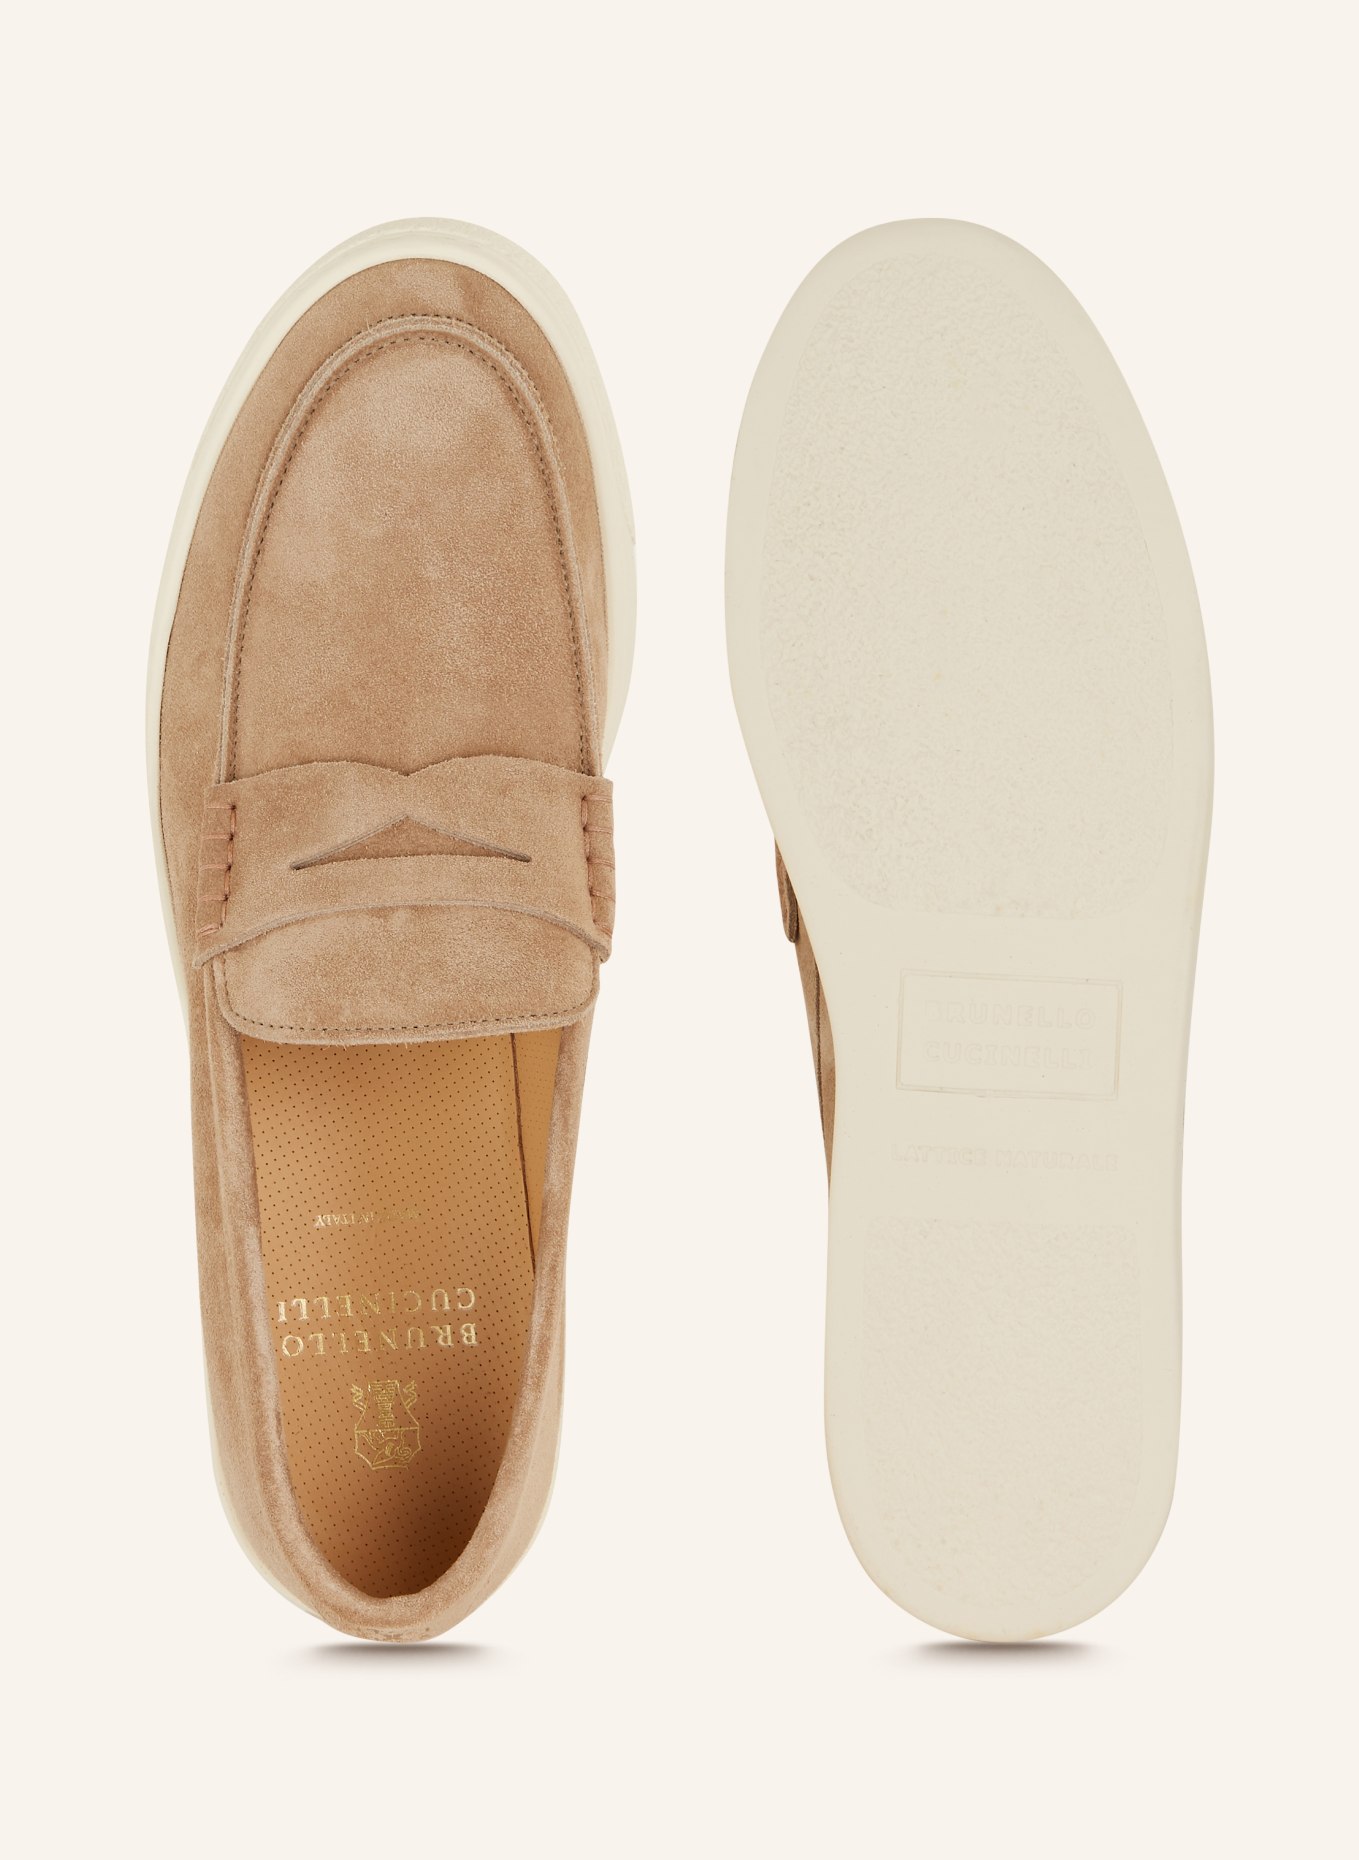 BRUNELLO CUCINELLI Penny loafers, Color: BEIGE (Image 5)